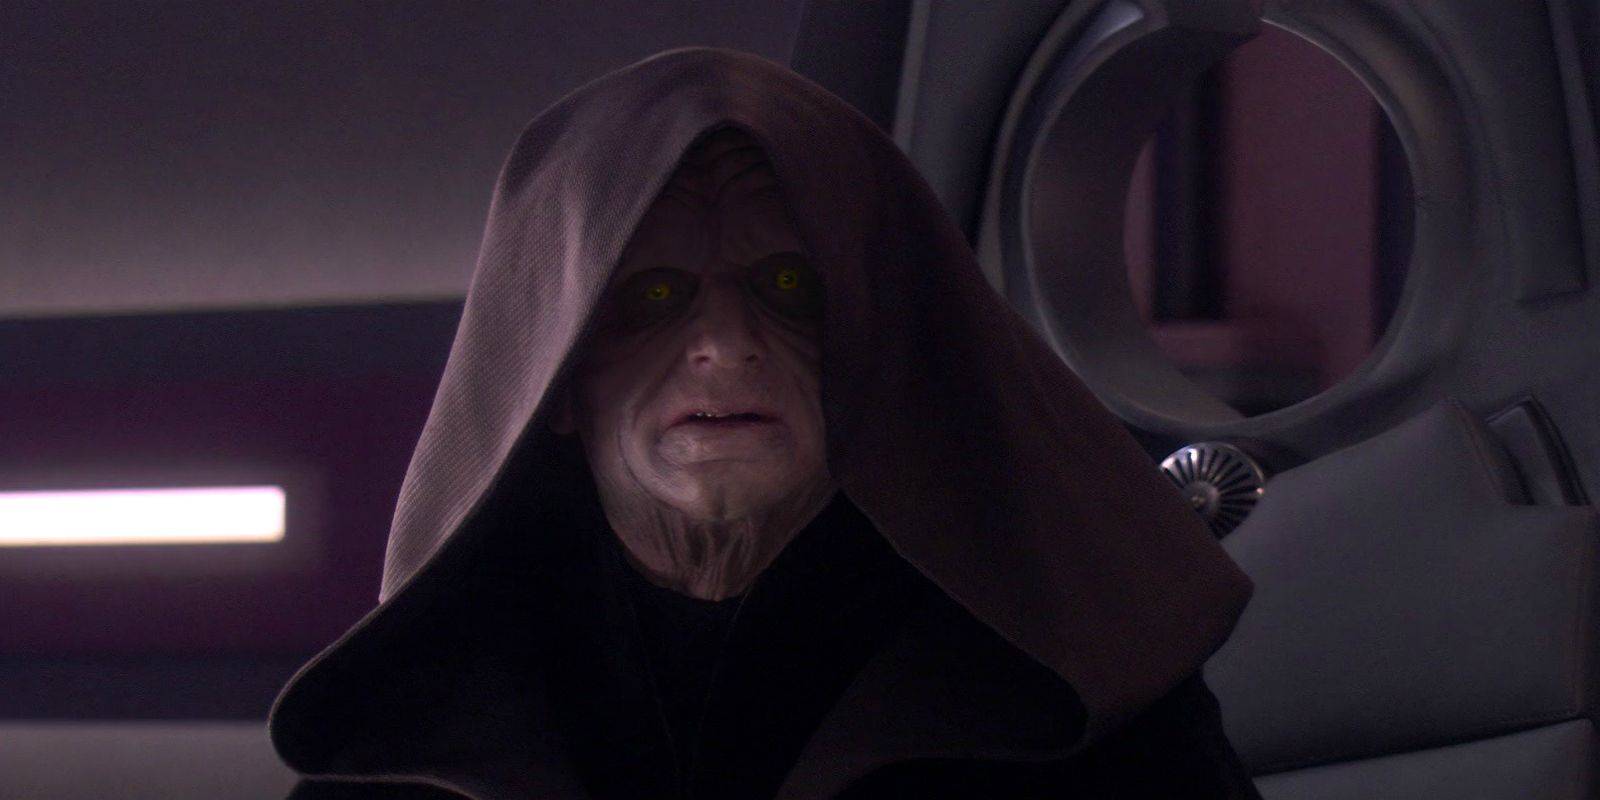 Darth Sidious sitting in a chair in Star Wars: Revenge of the Sith.